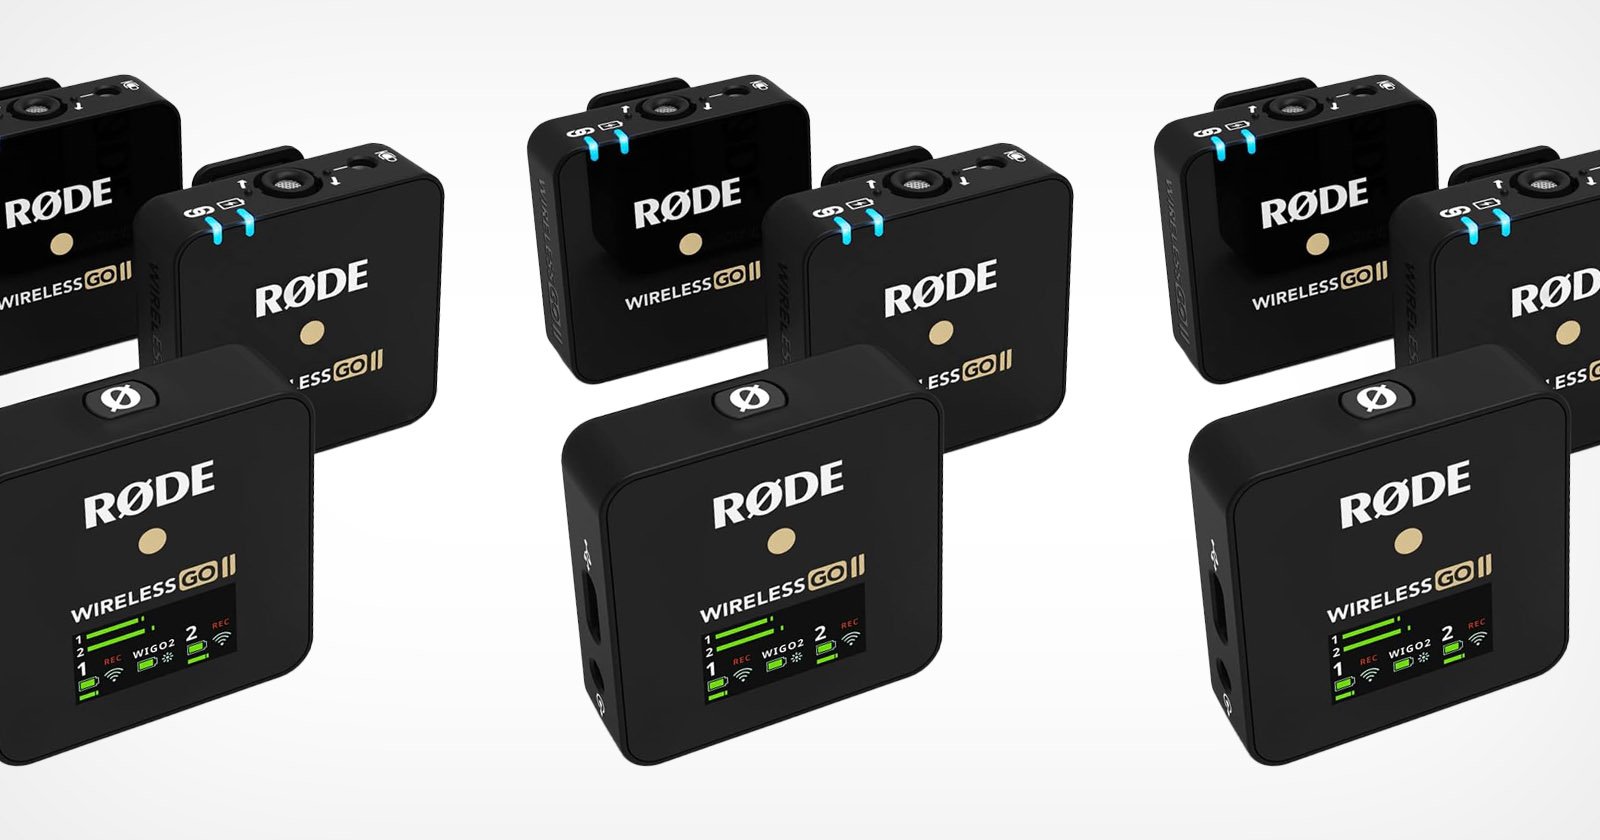 RODEs Excellent Wireless Go II Mics are $100 Off Right Now